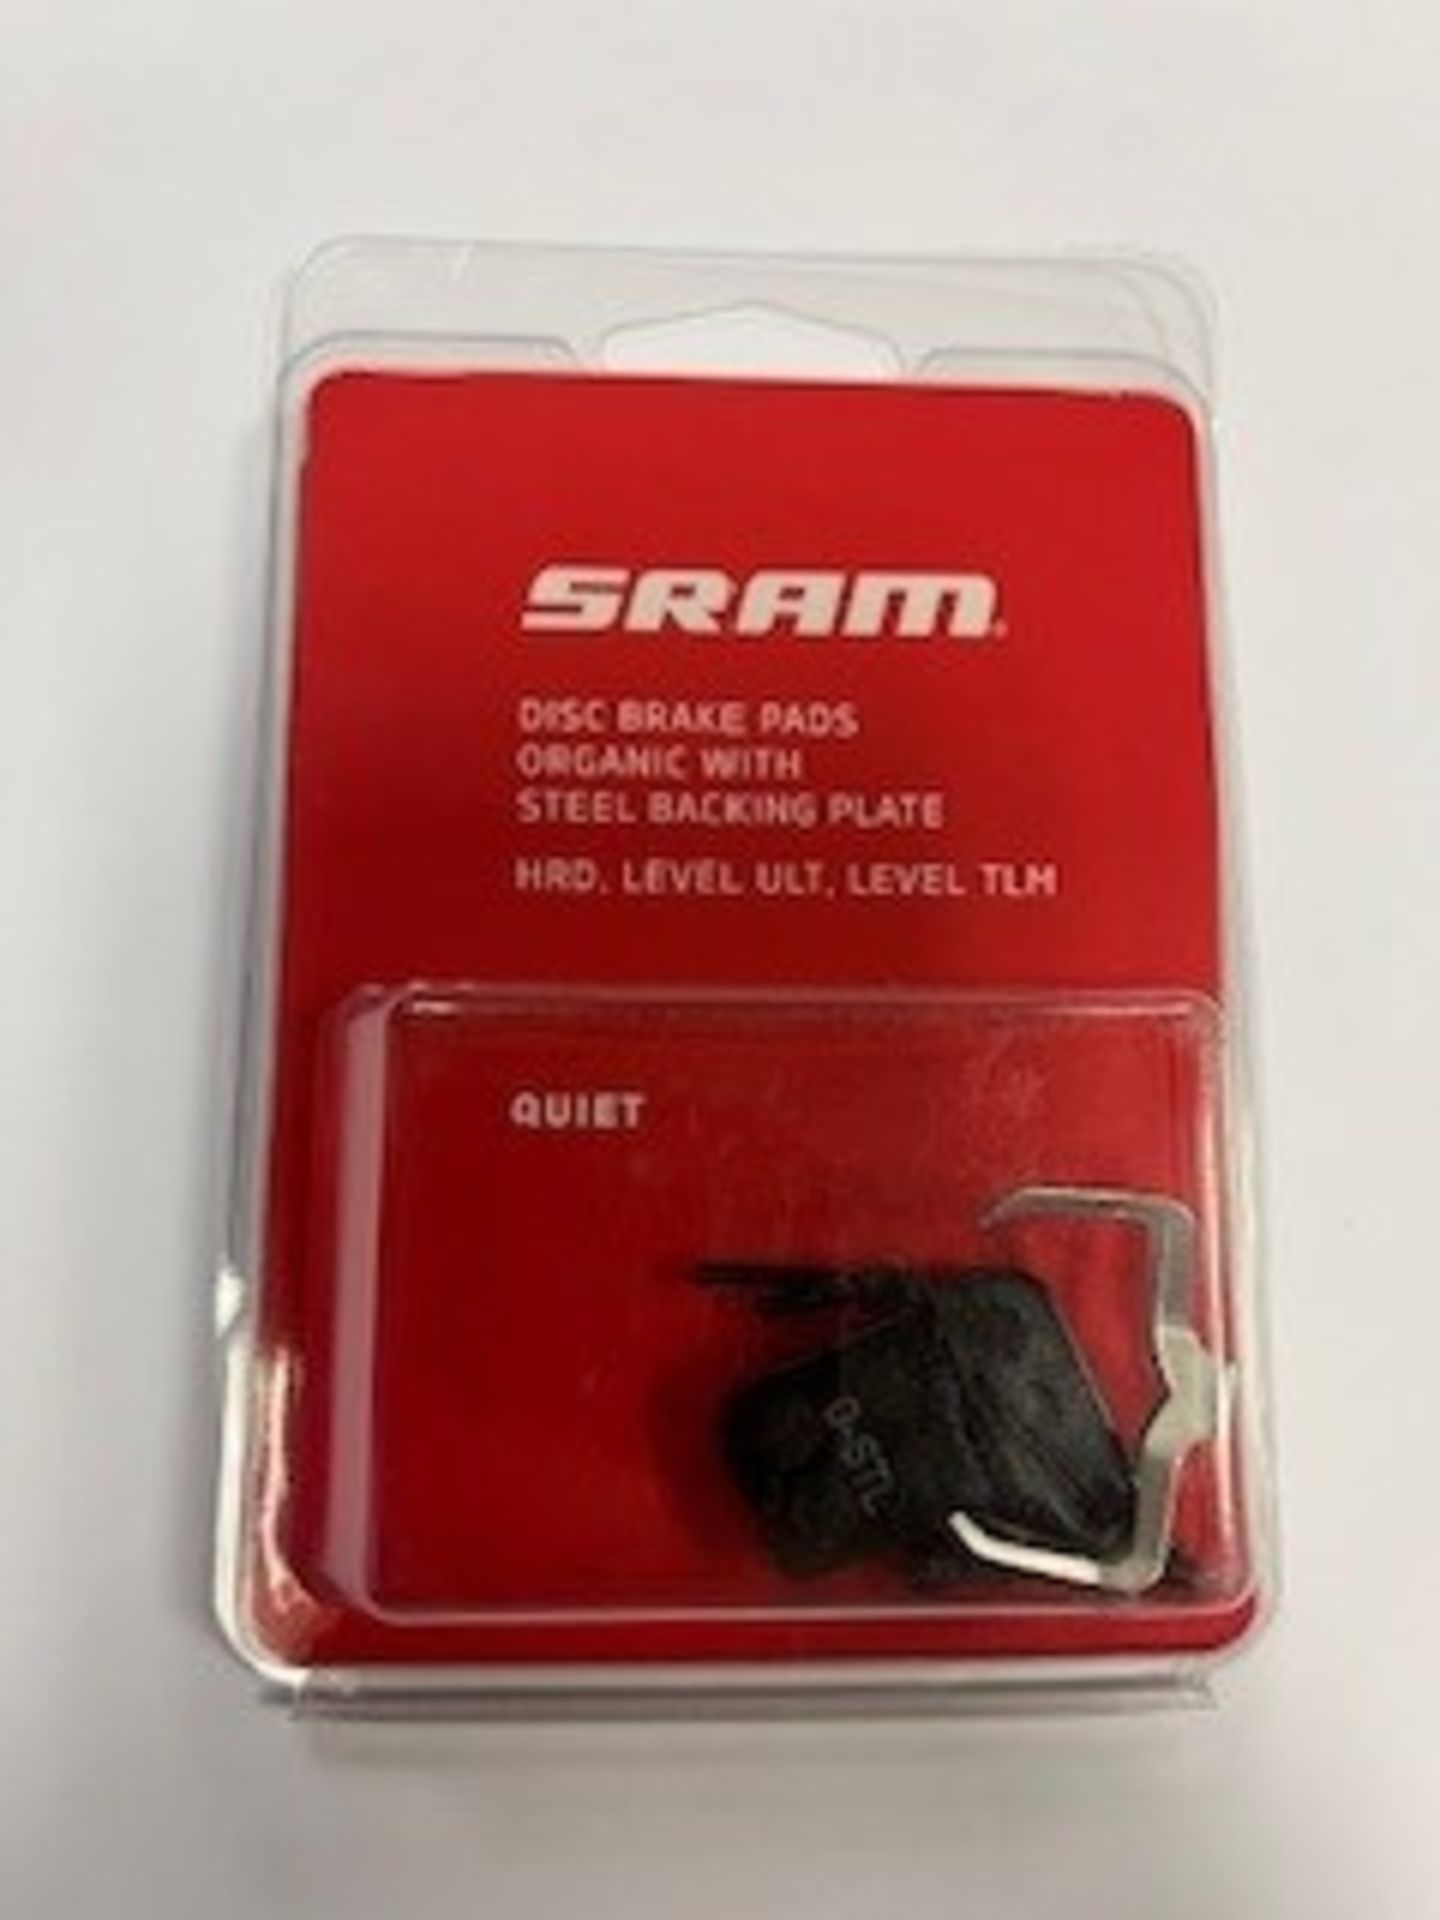 Sram Brake Pads to include 5x Disc Brake Pads Organic with Steel Backing Plate (HRD, LEVEL ULT, LEVE - Bild 7 aus 9